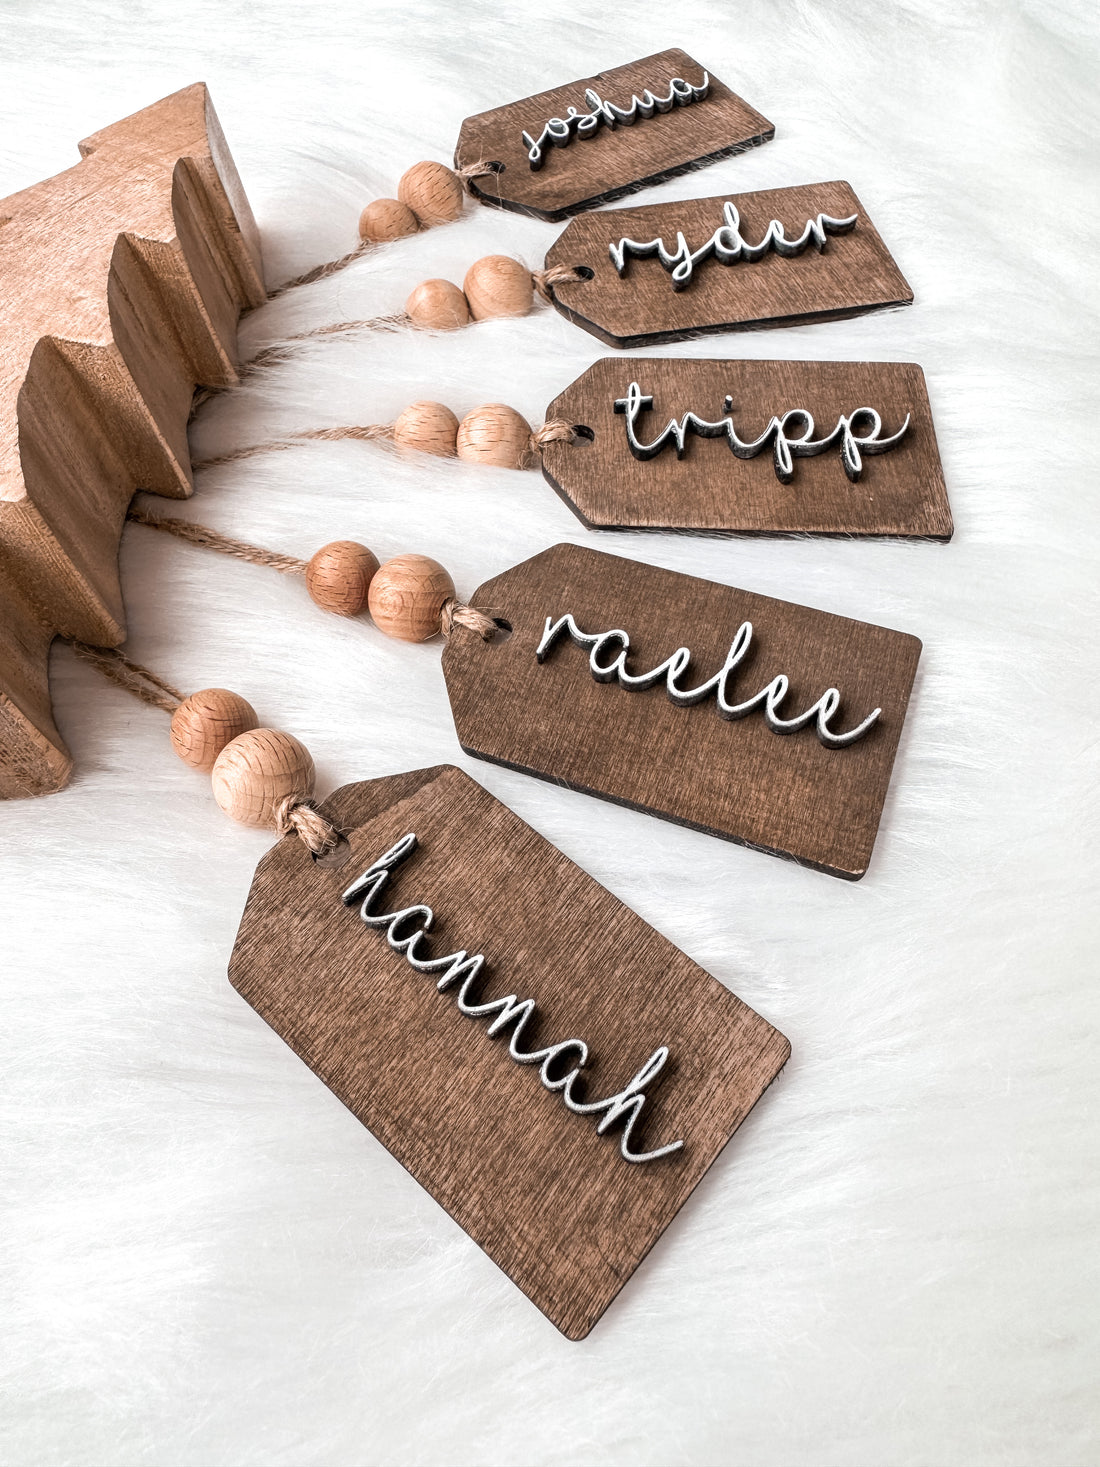 Wooden Name Tags | Stocking Tags | Personalized Gifts - EllaLaine